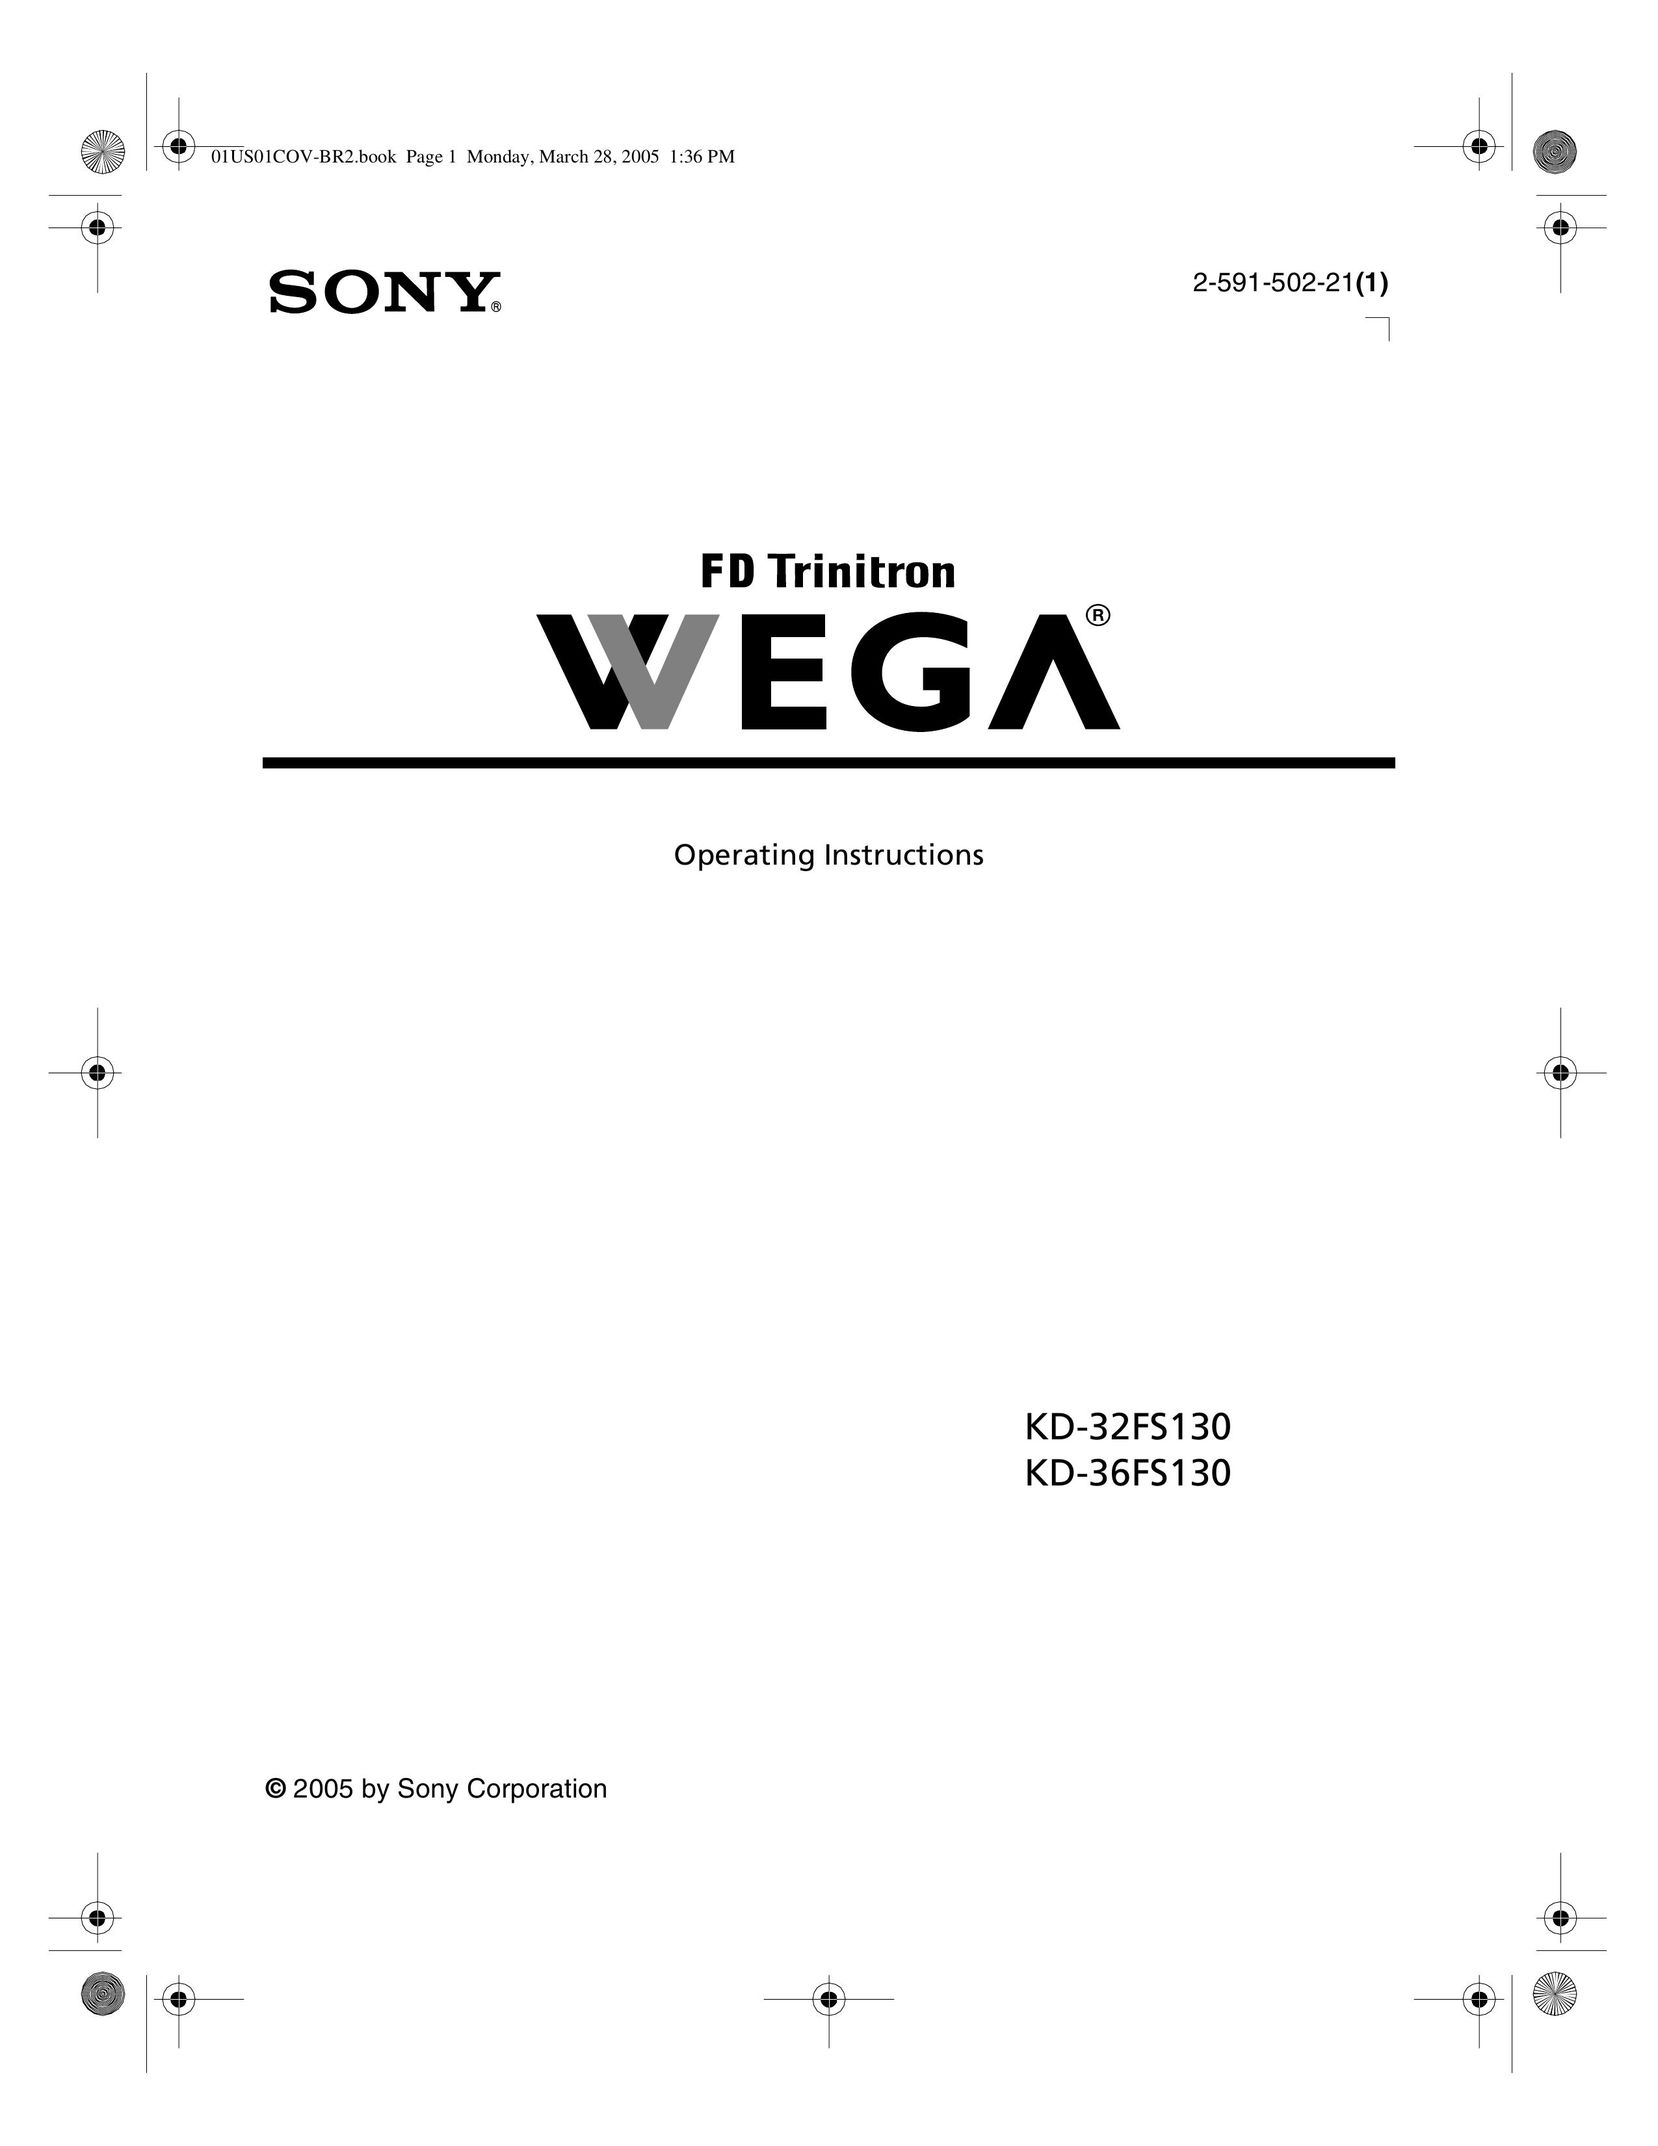 Sony KD 32FS130 CRT Television User Manual